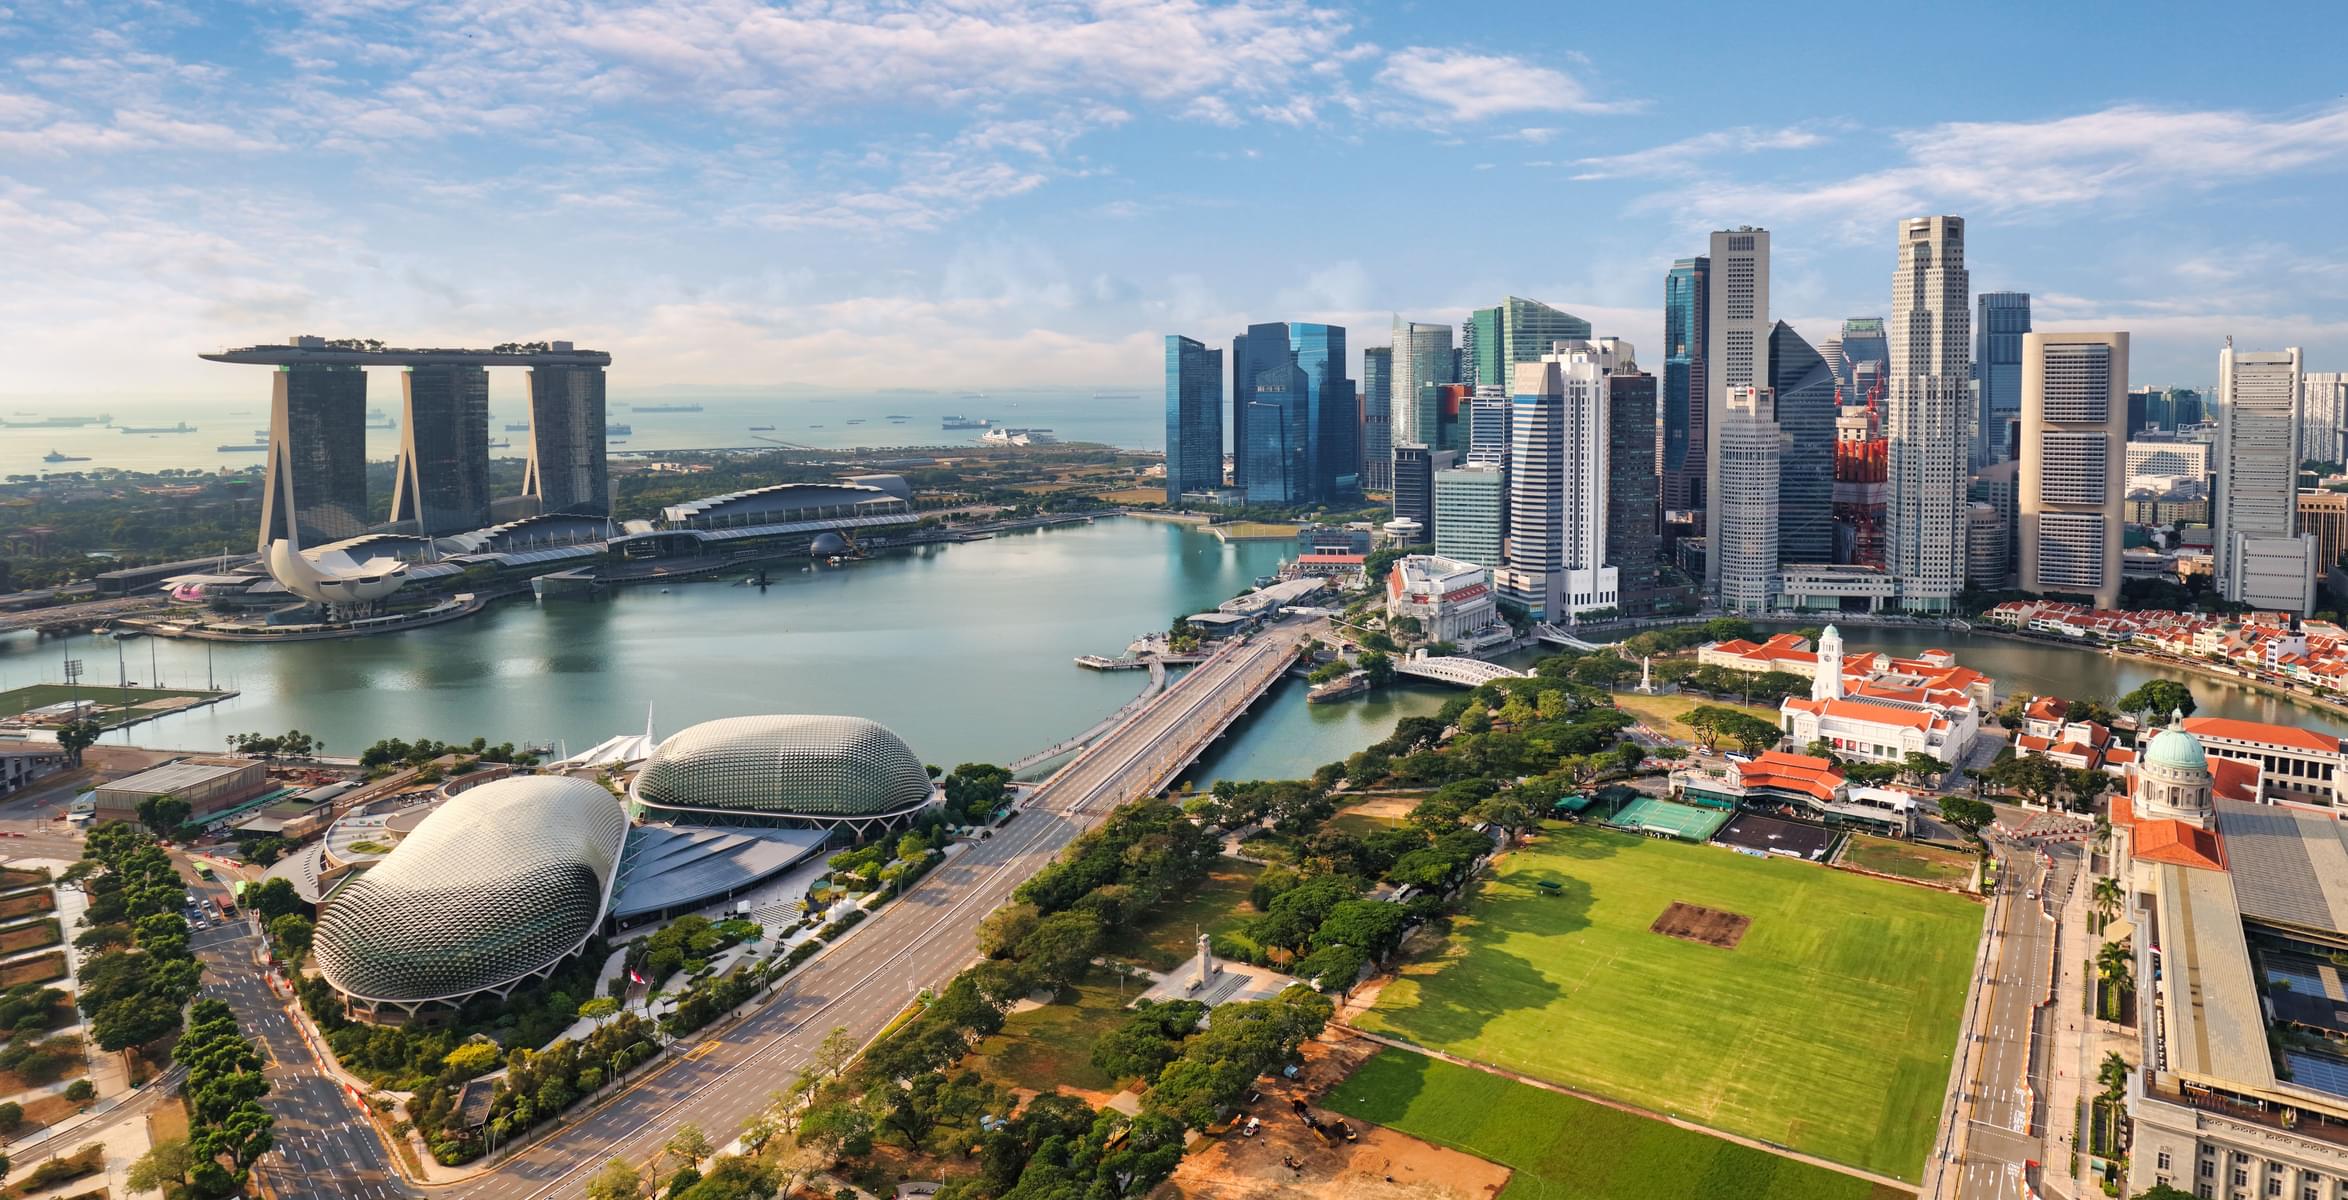 How To Pick Up The Best Singapore City Tour?